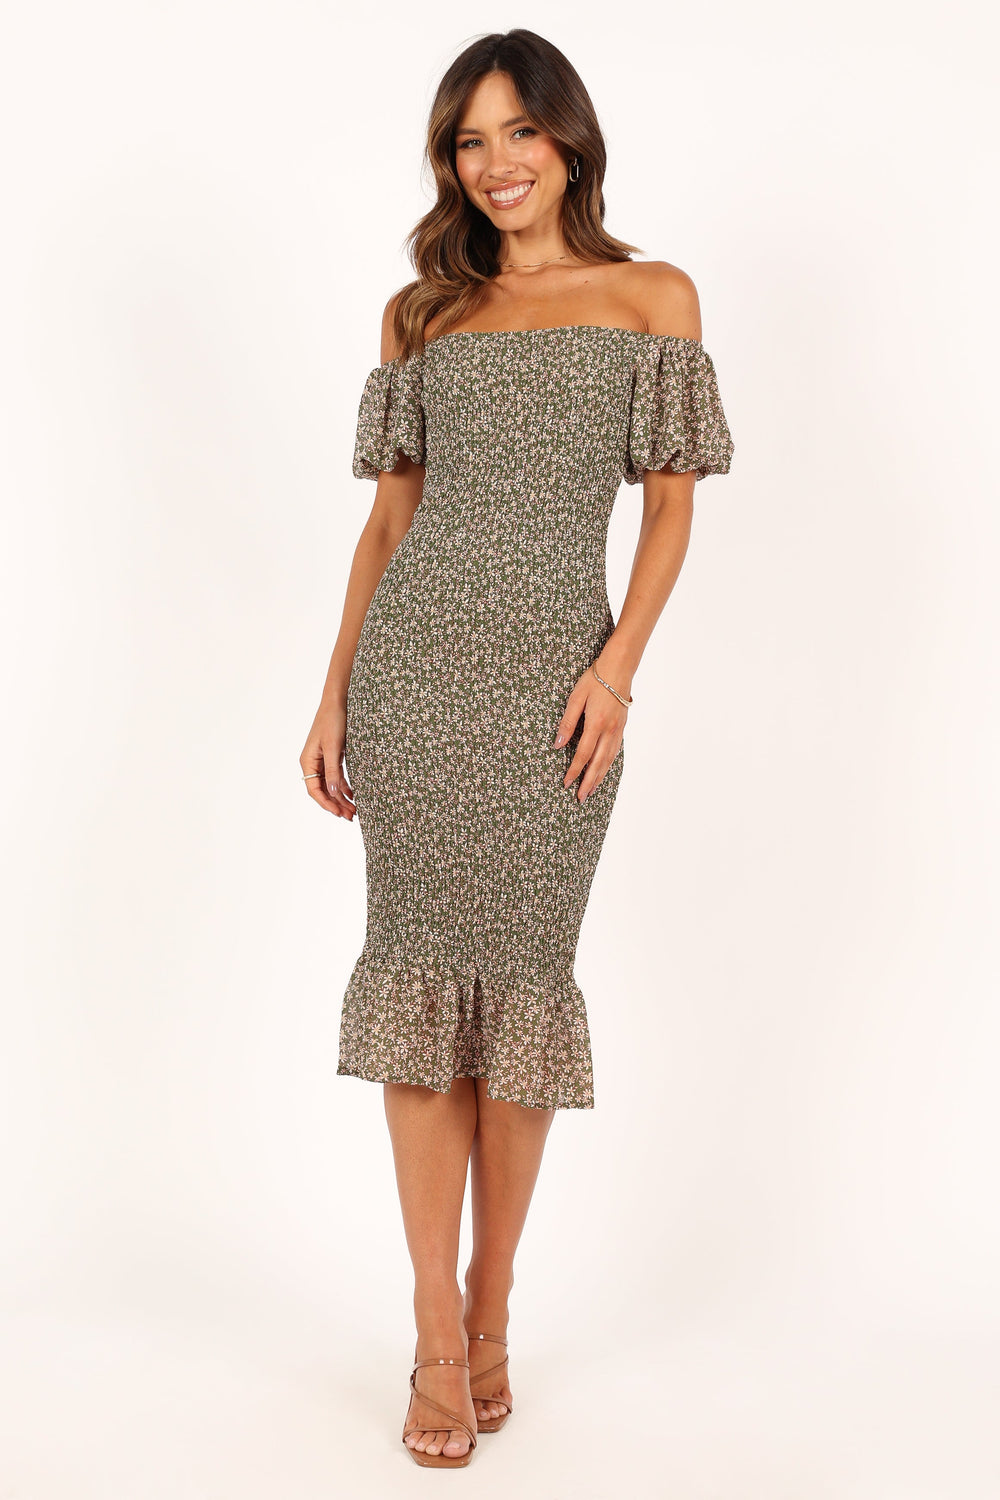 Petal and Pup USA DRESSES Claire Shirred Bodycon Off Shoulder Midi Dress - Green Floral